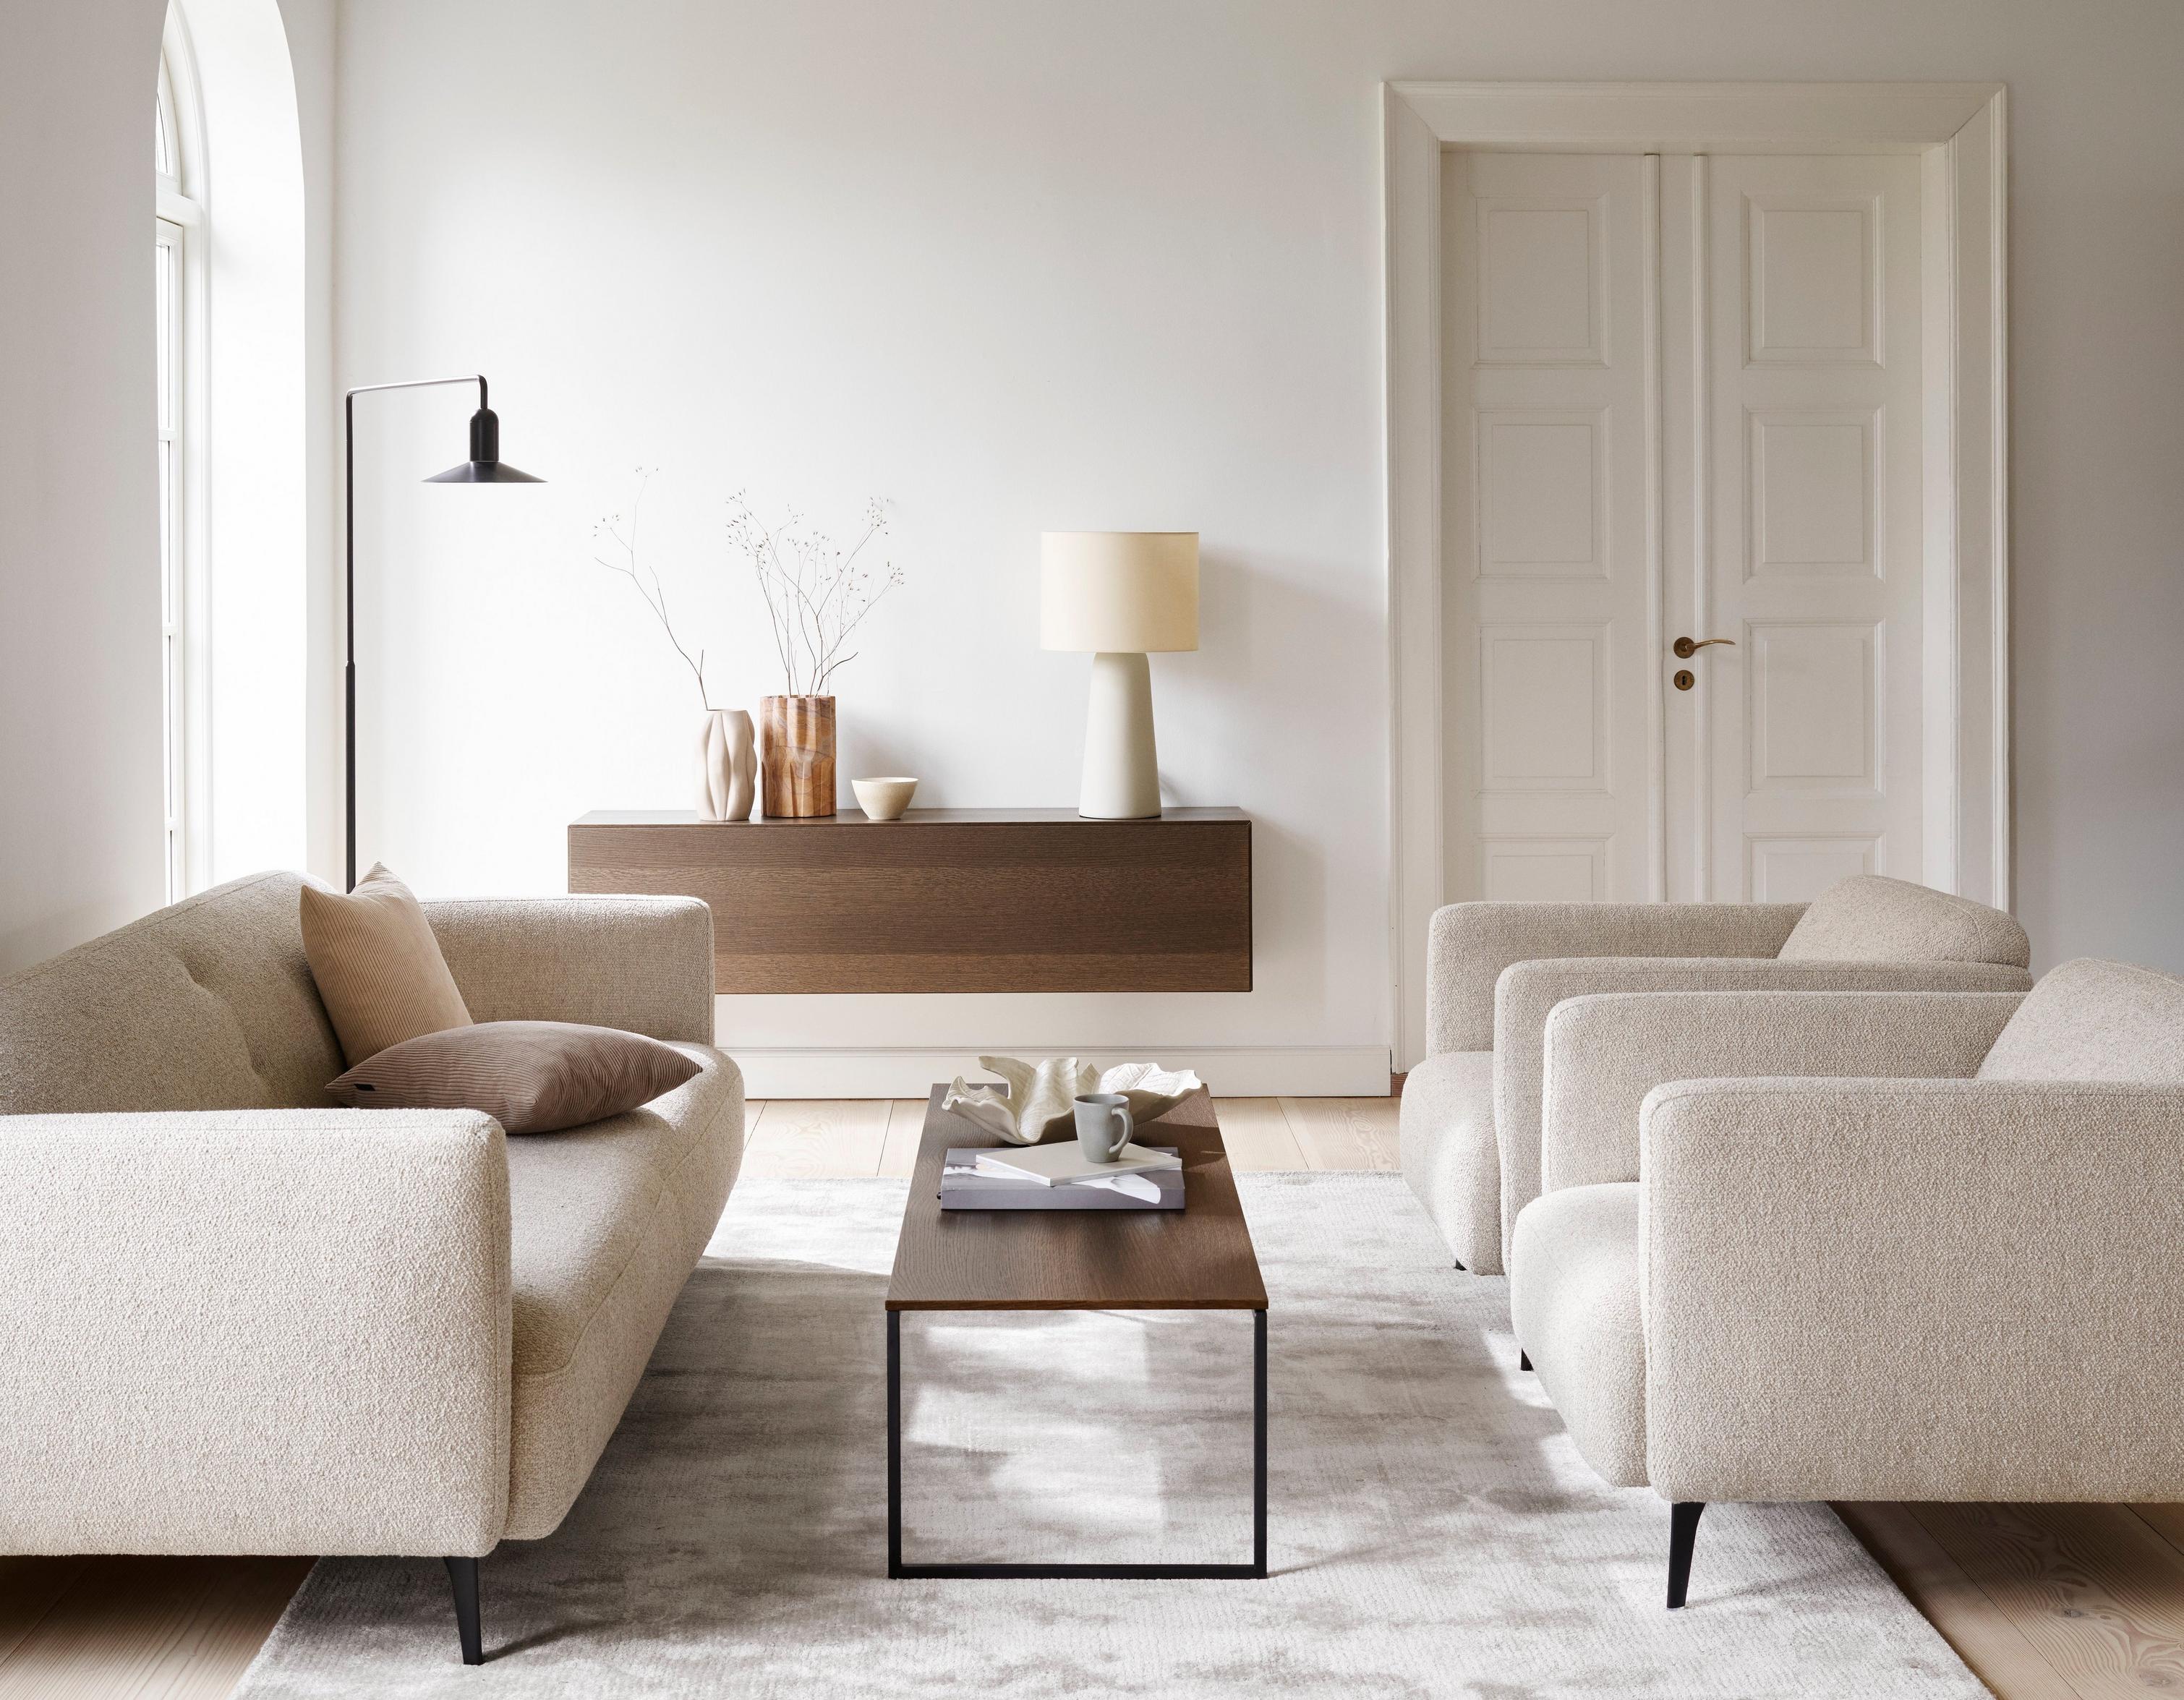 The Modena 3 seater in beige Lazio with the Modena chair and the Lugo coffee table.